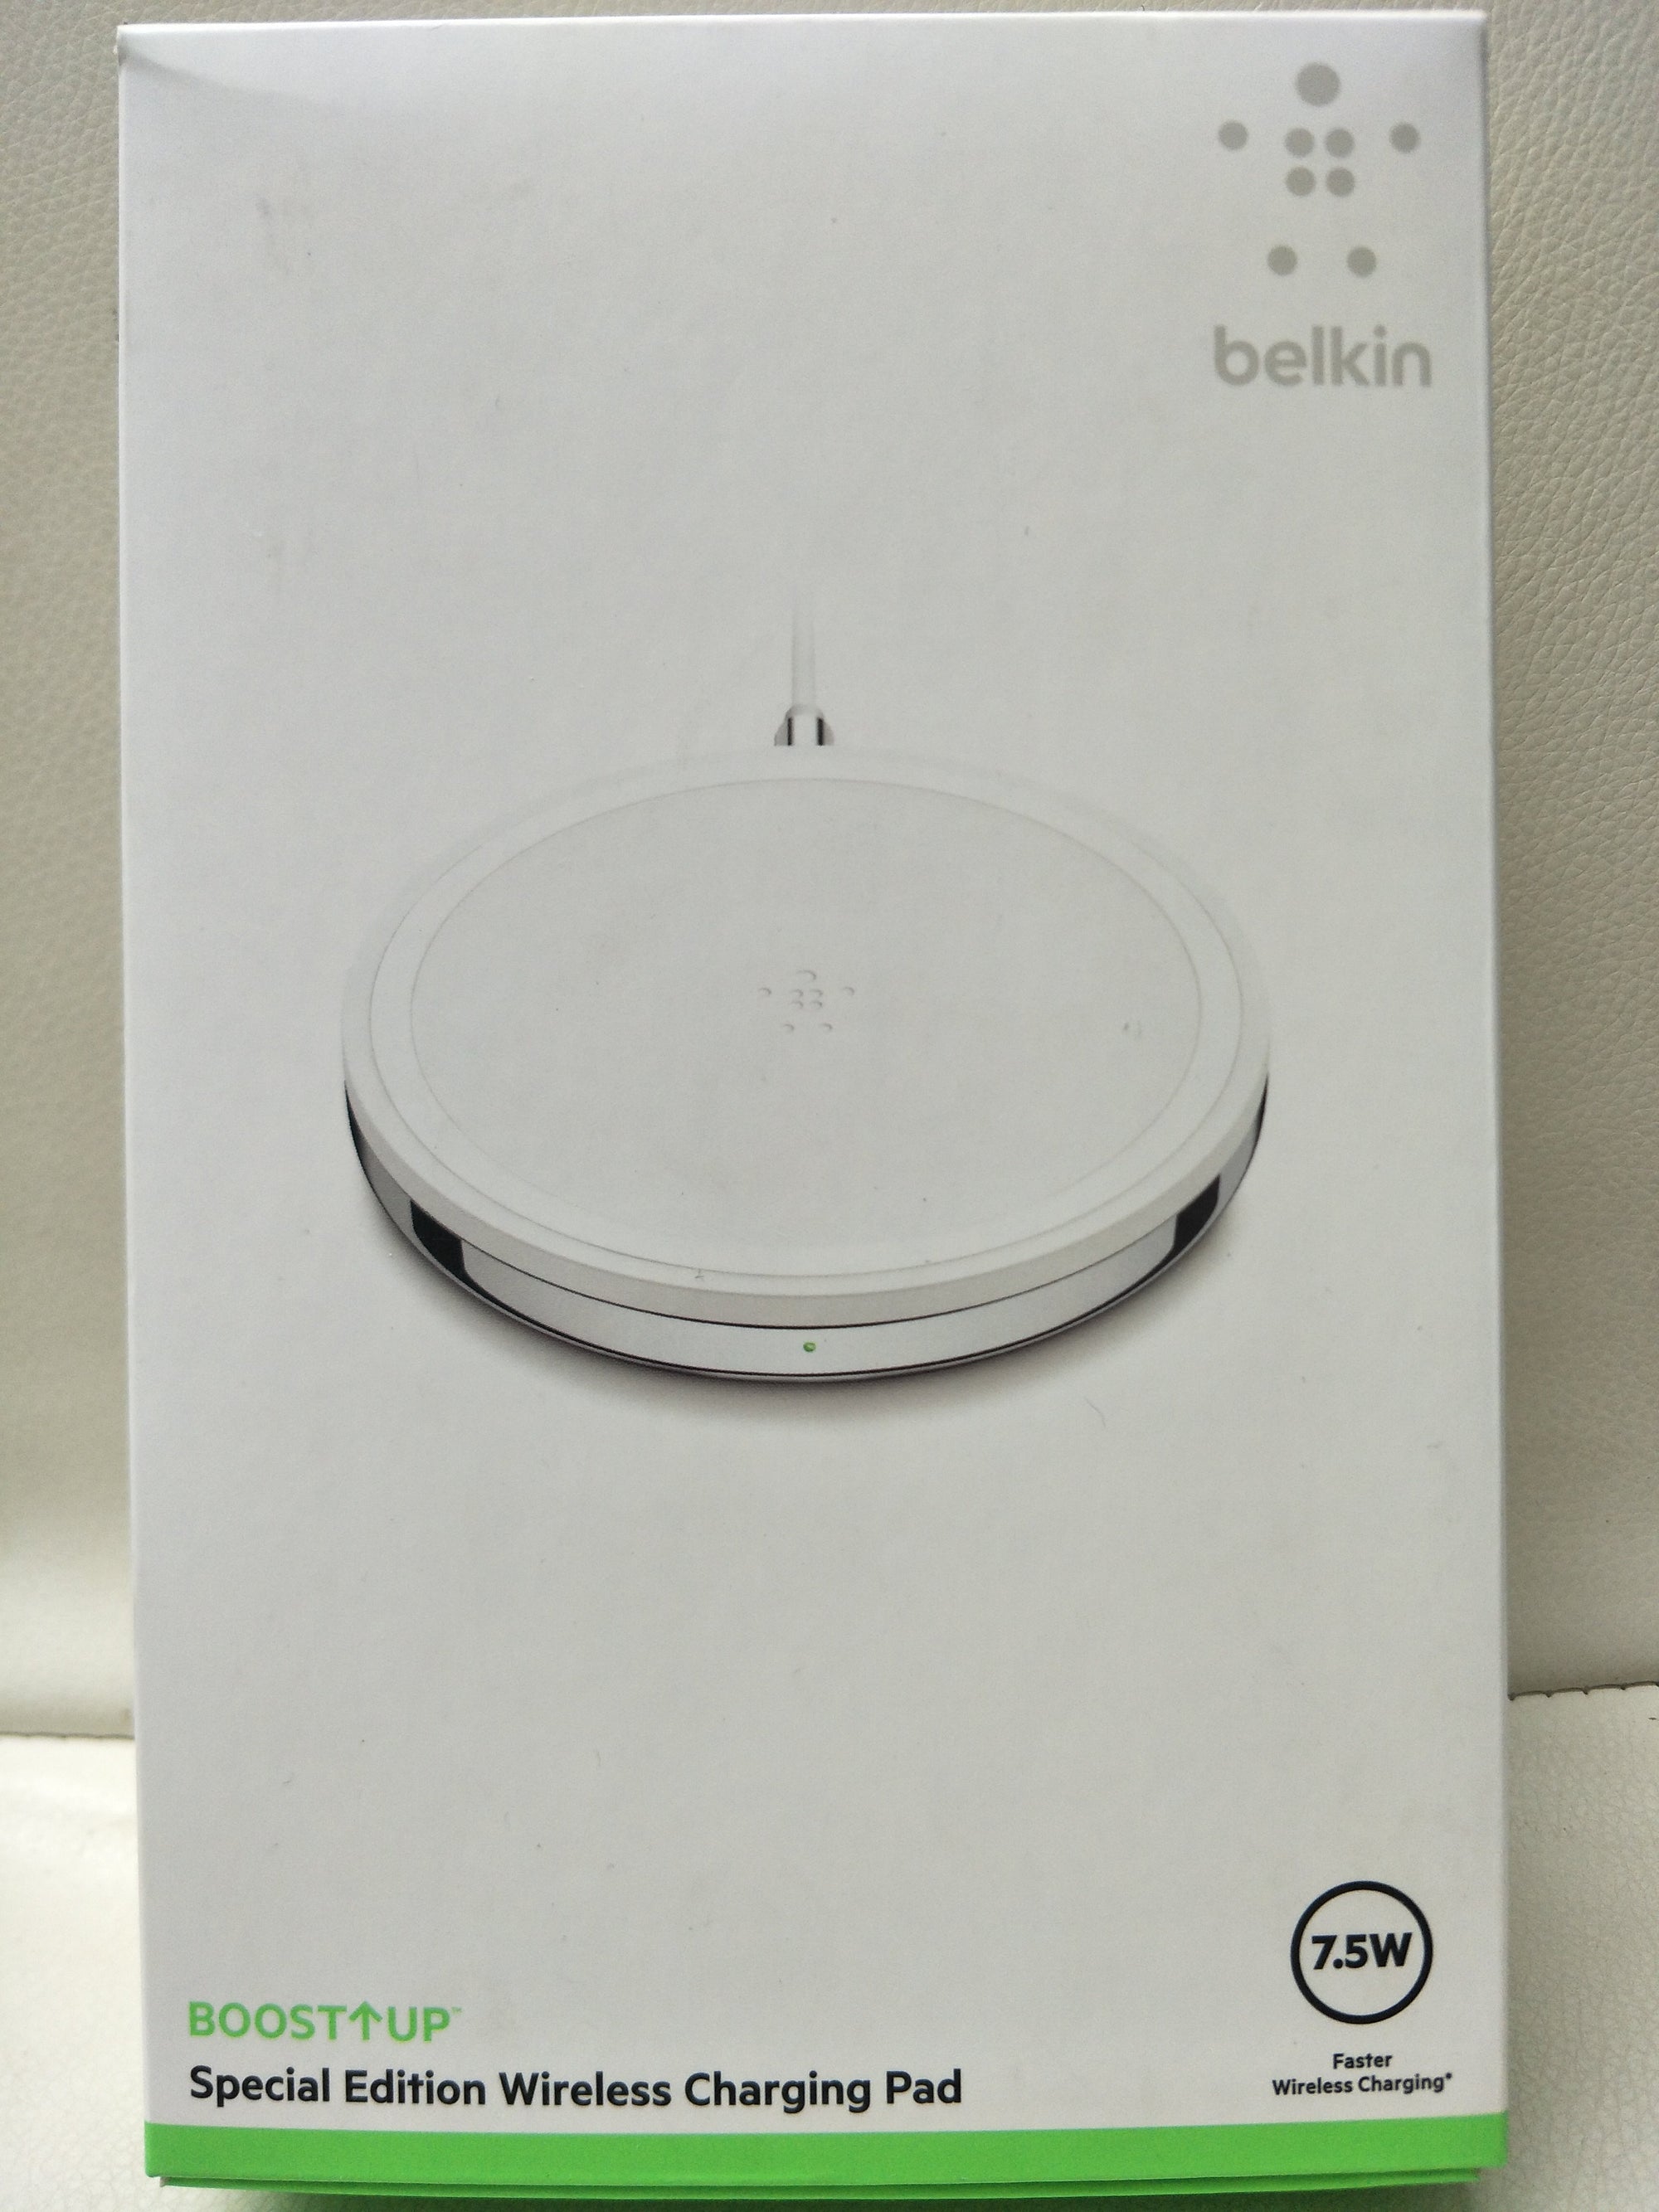 Belkin Boost Up Special Edition Wireless Charging Pad 7.5W - White